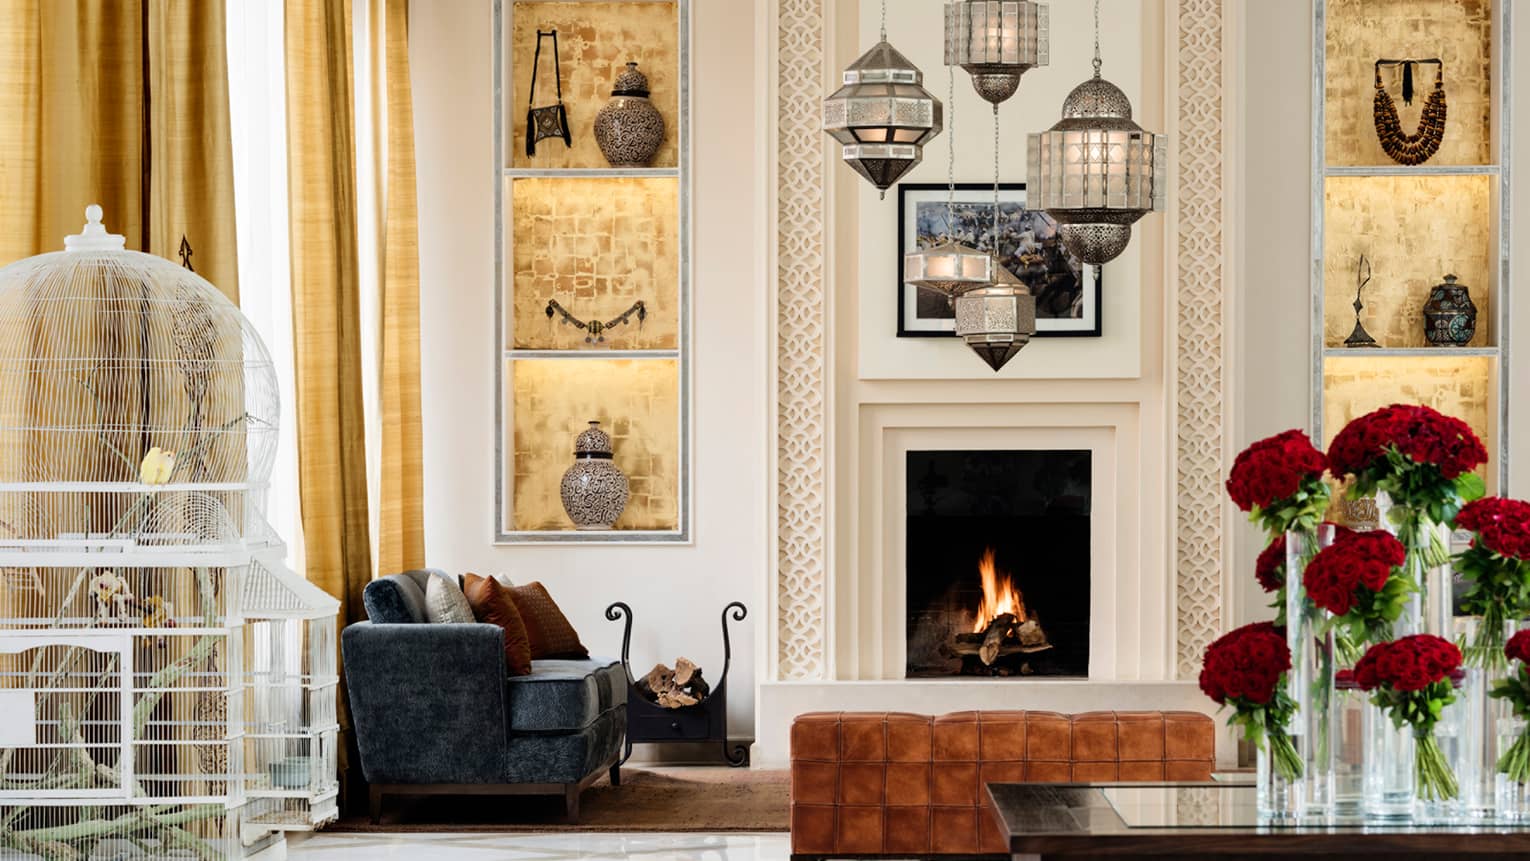 Four Season Rooms with Fireplaces Elegant Marrakech Hotel S & Videos